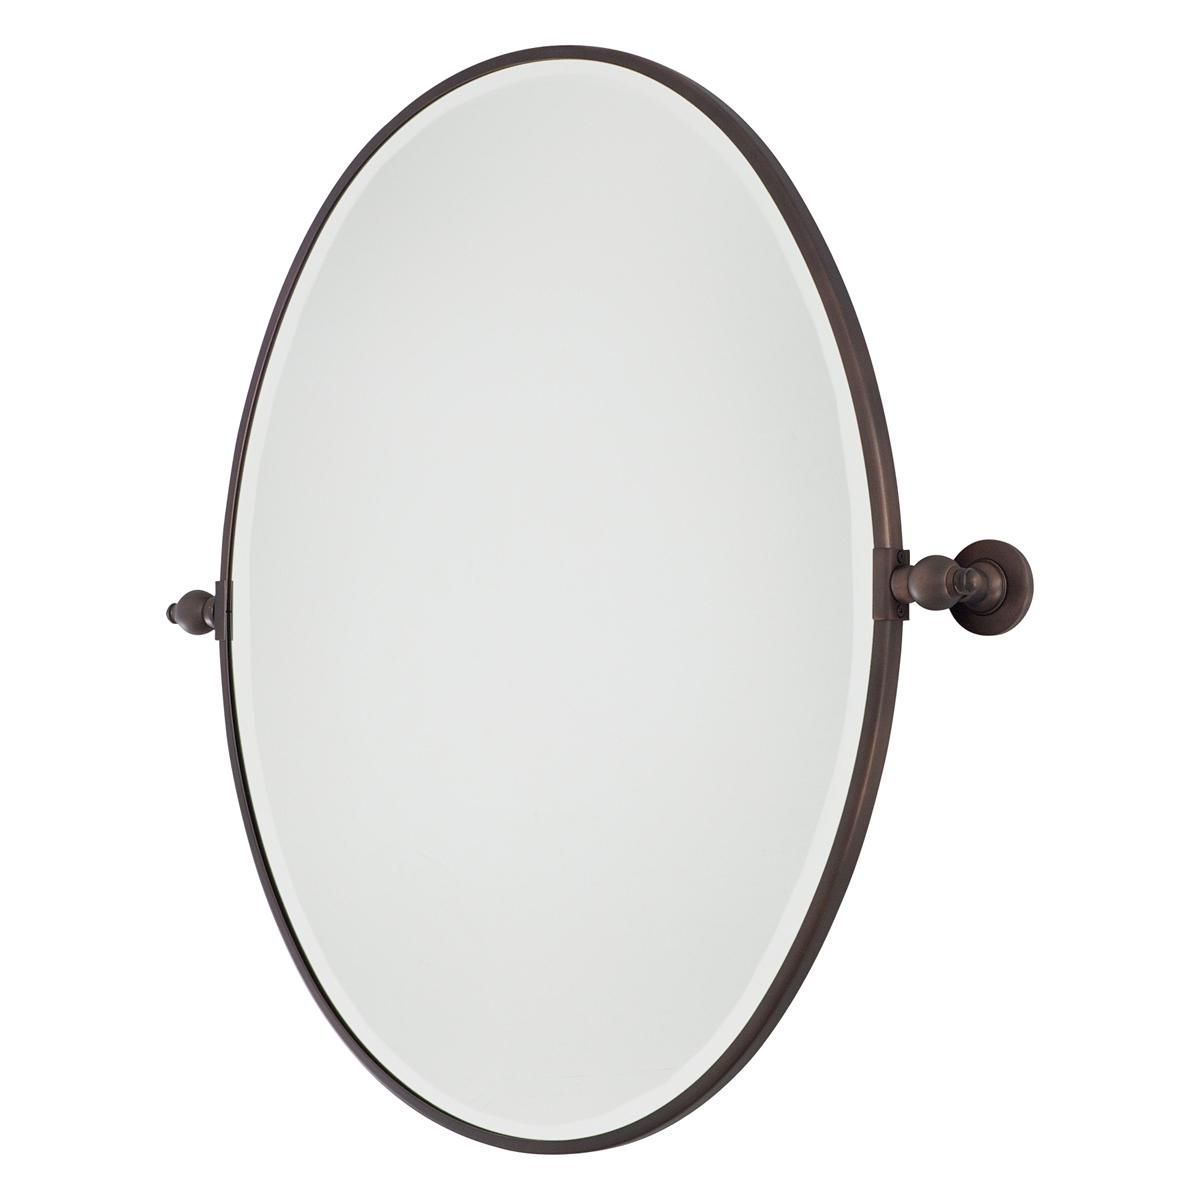 Oval Tilt Bathroom Mirror Large – 3 Finishes (with Images) (View 6 of 15)